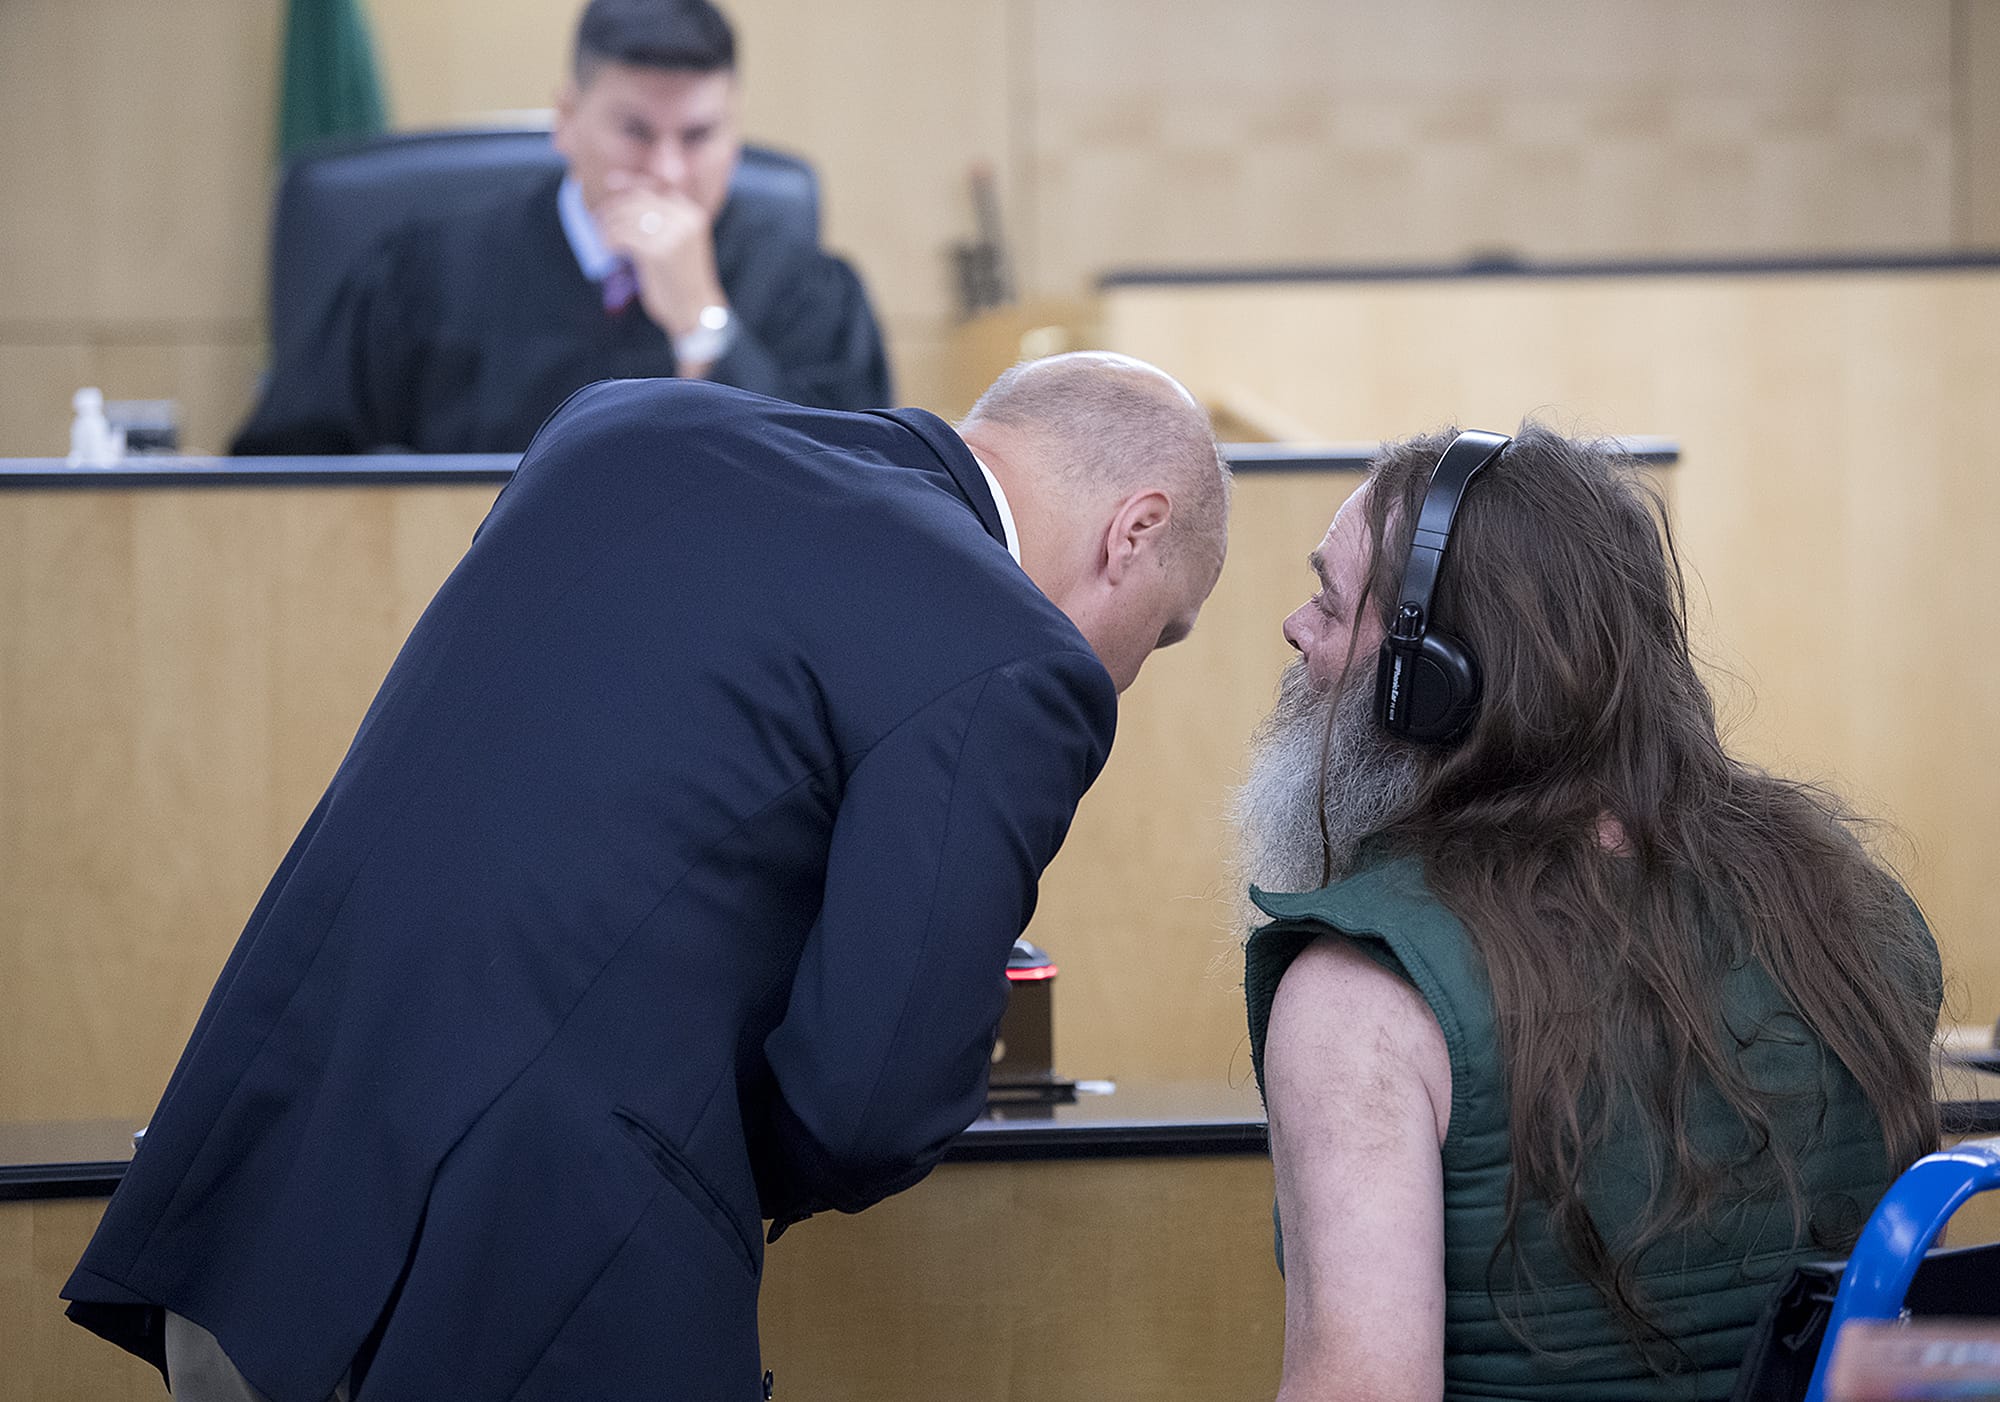 Timothy J. White, 59, right, makes a first appearance in Clark County Superior Court on Thursday morning, Aug. 23, 2018 while facing allegations he threatened staff at PeaceHeath Southwest Medical Center. White is wearing headphones to help aid his hearing.